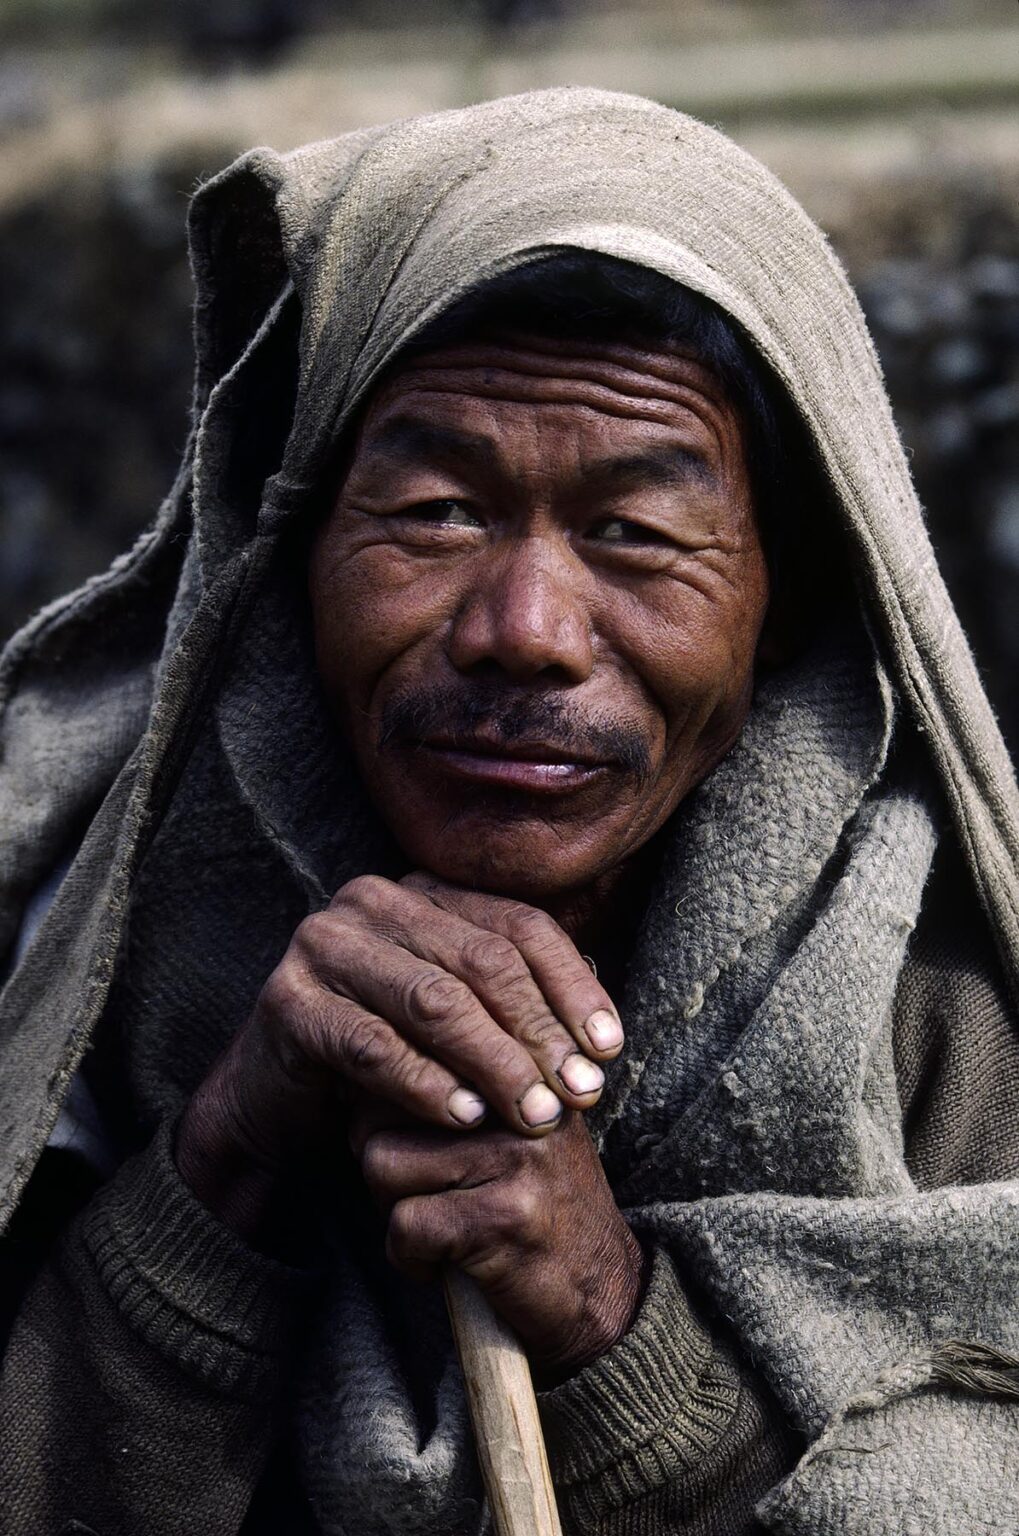 PORTRAIT of a GURUNG MAN with a blanket on his head - ANNAPURNA REGION, CENTRAL NEPAL